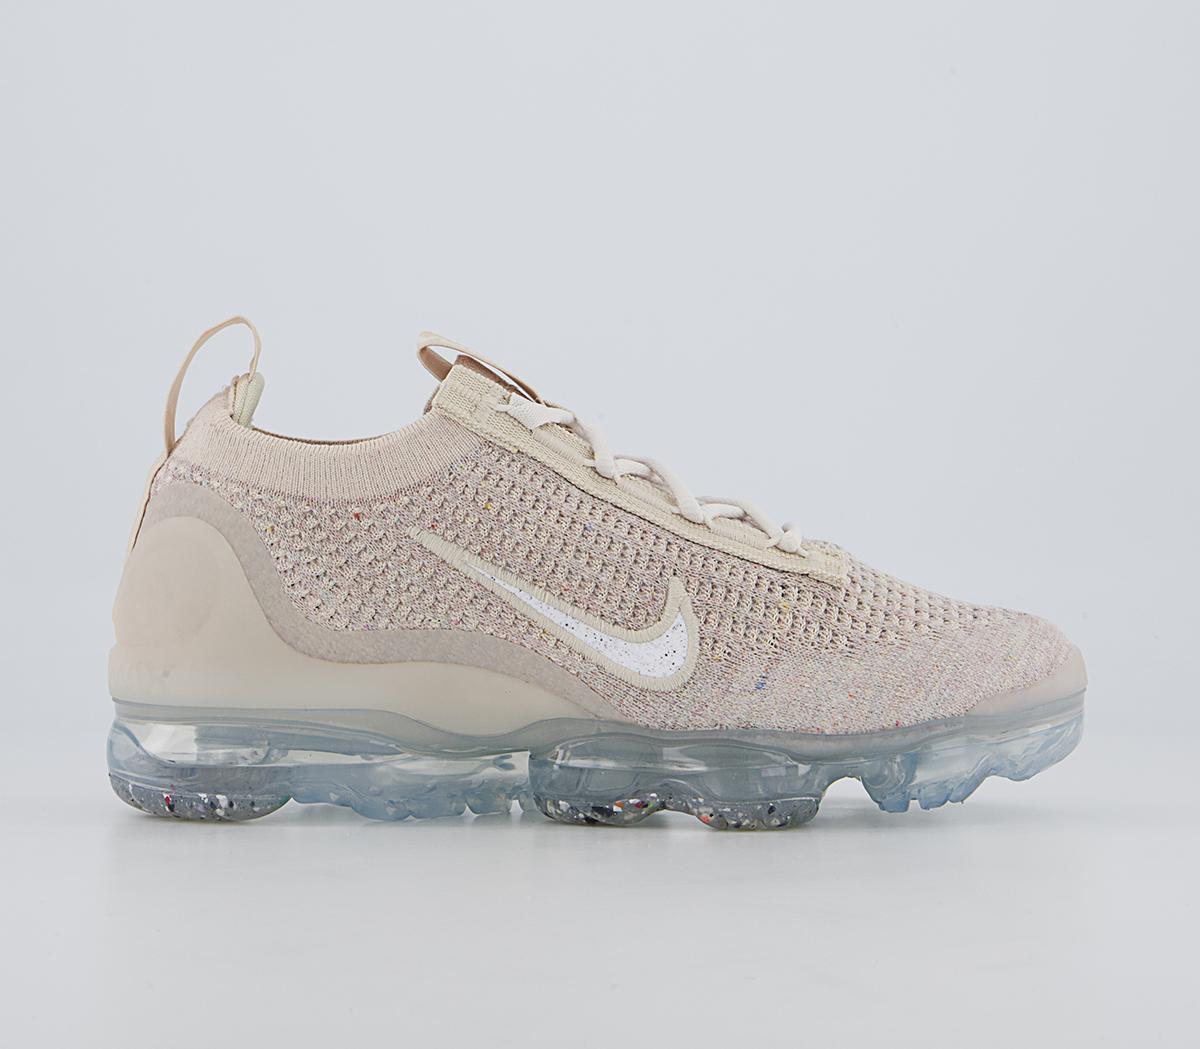 Vapormax 2021 Trainers